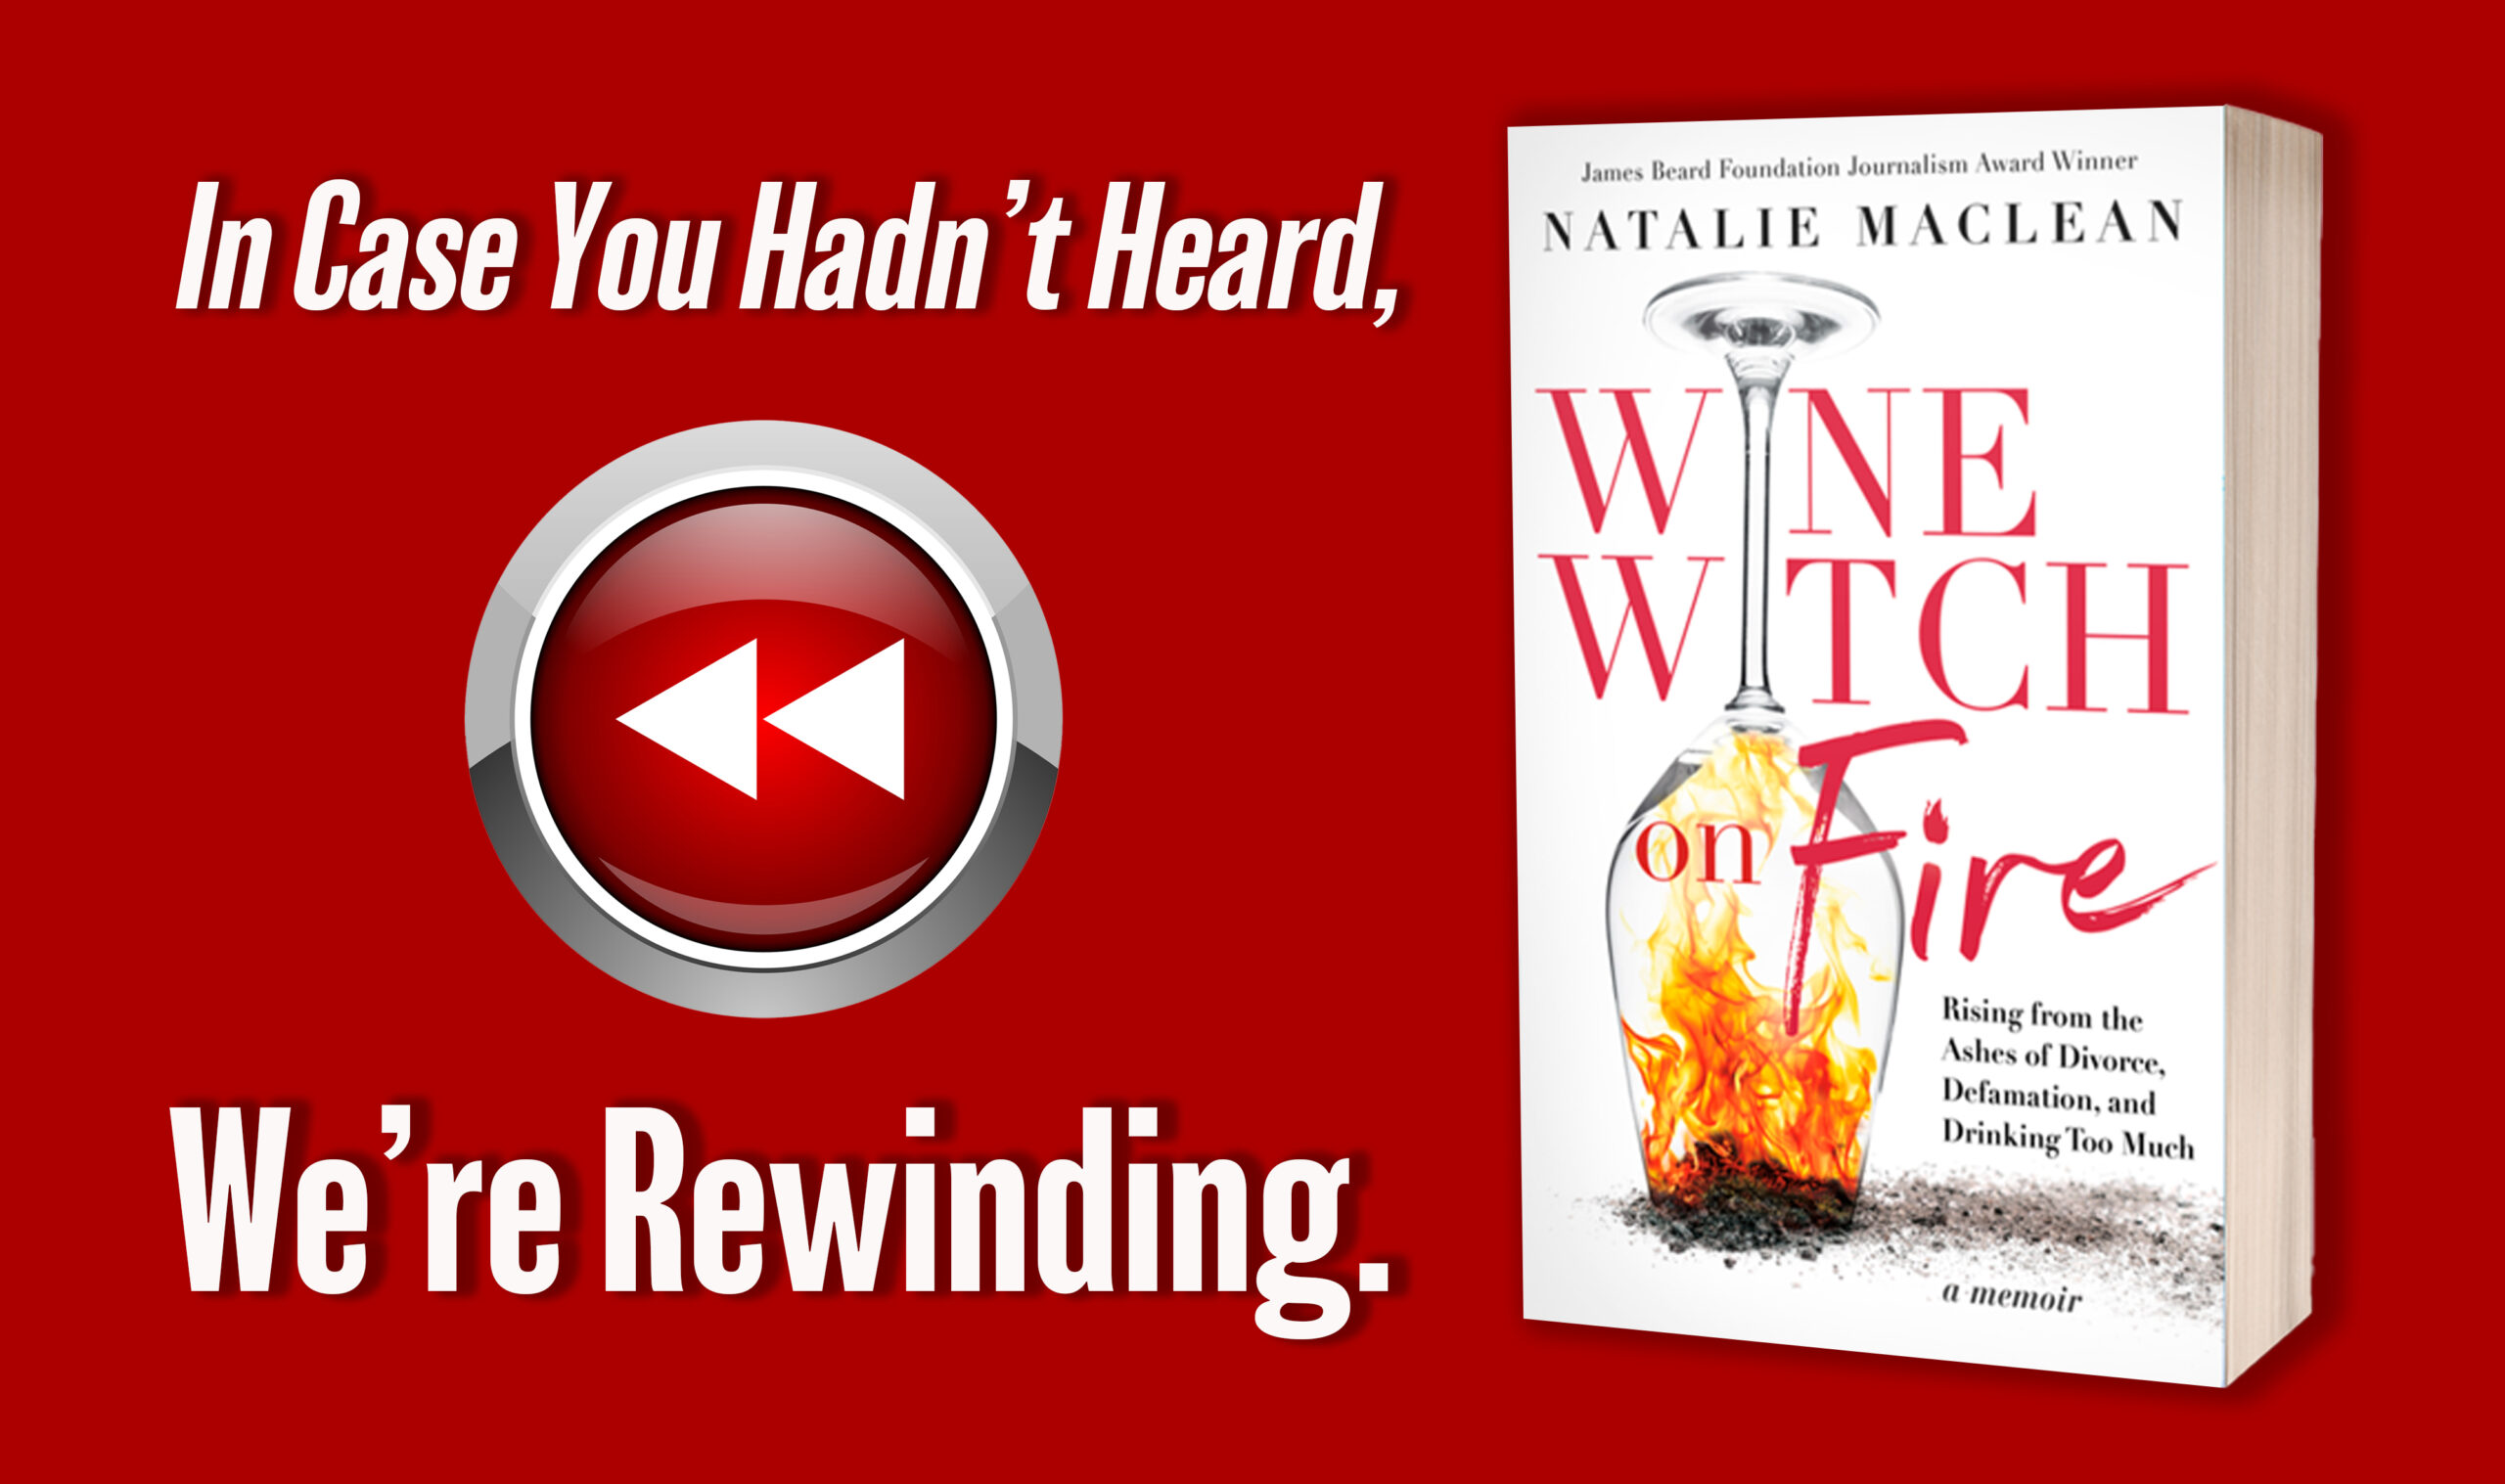 Episode #744 – Encore! An Hour With Natalie MacLean, Author of the Season’s Hottest Read, “Wine Witch on Fire…”